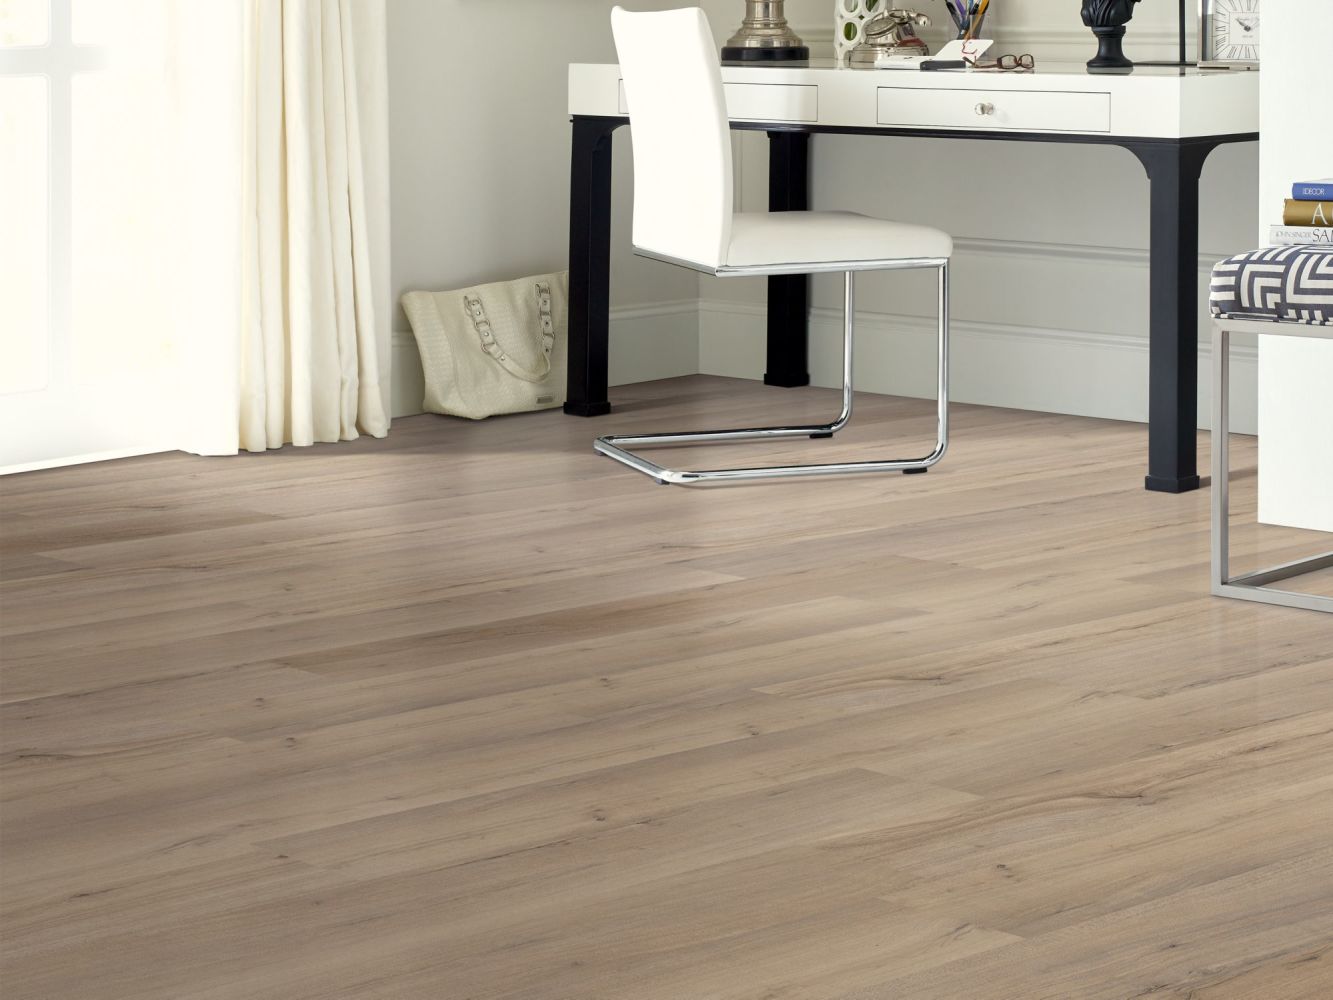 Shaw Floors Resilient Residential Paramount 512c Plus Driftwood 01056_509SA